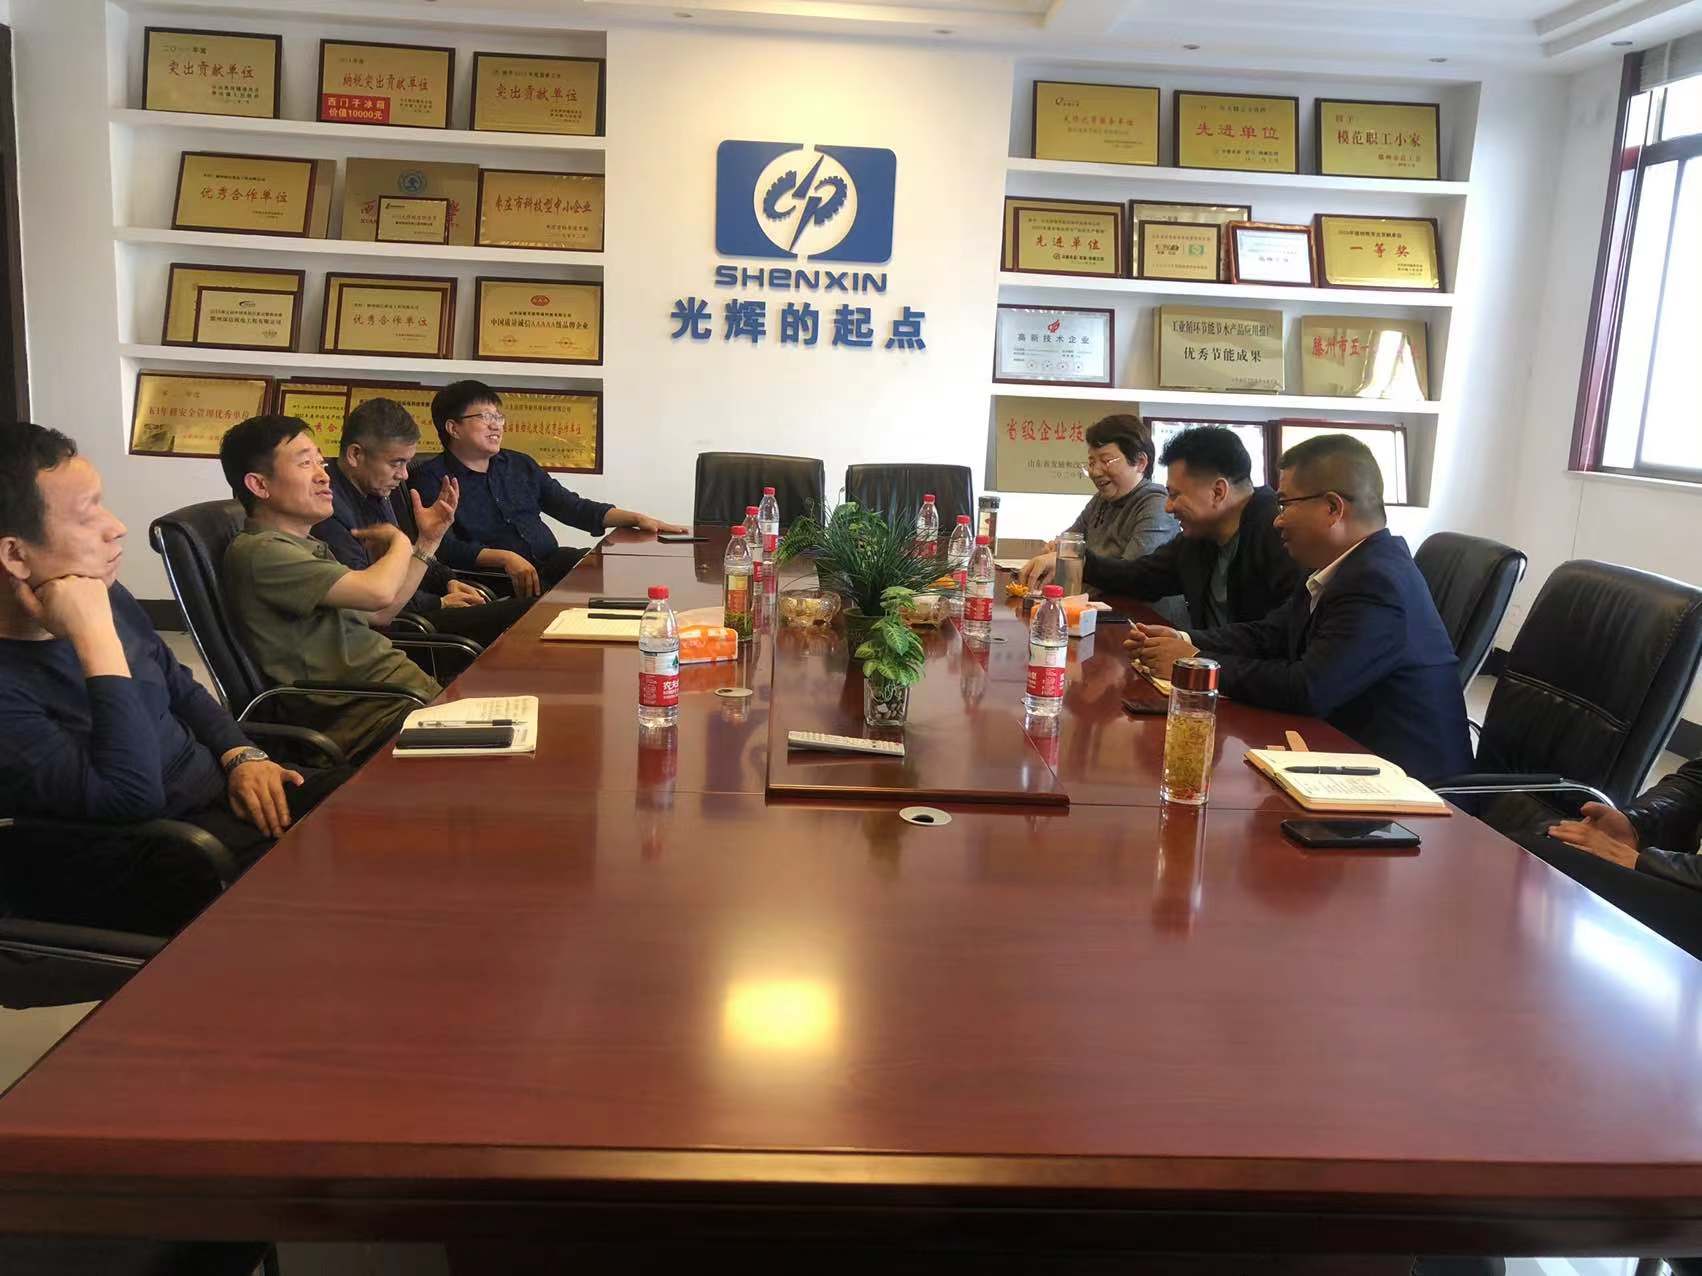 Leaders of Boritter thermal Energy Energy Energy Co., Ltd. visited the company for investigation